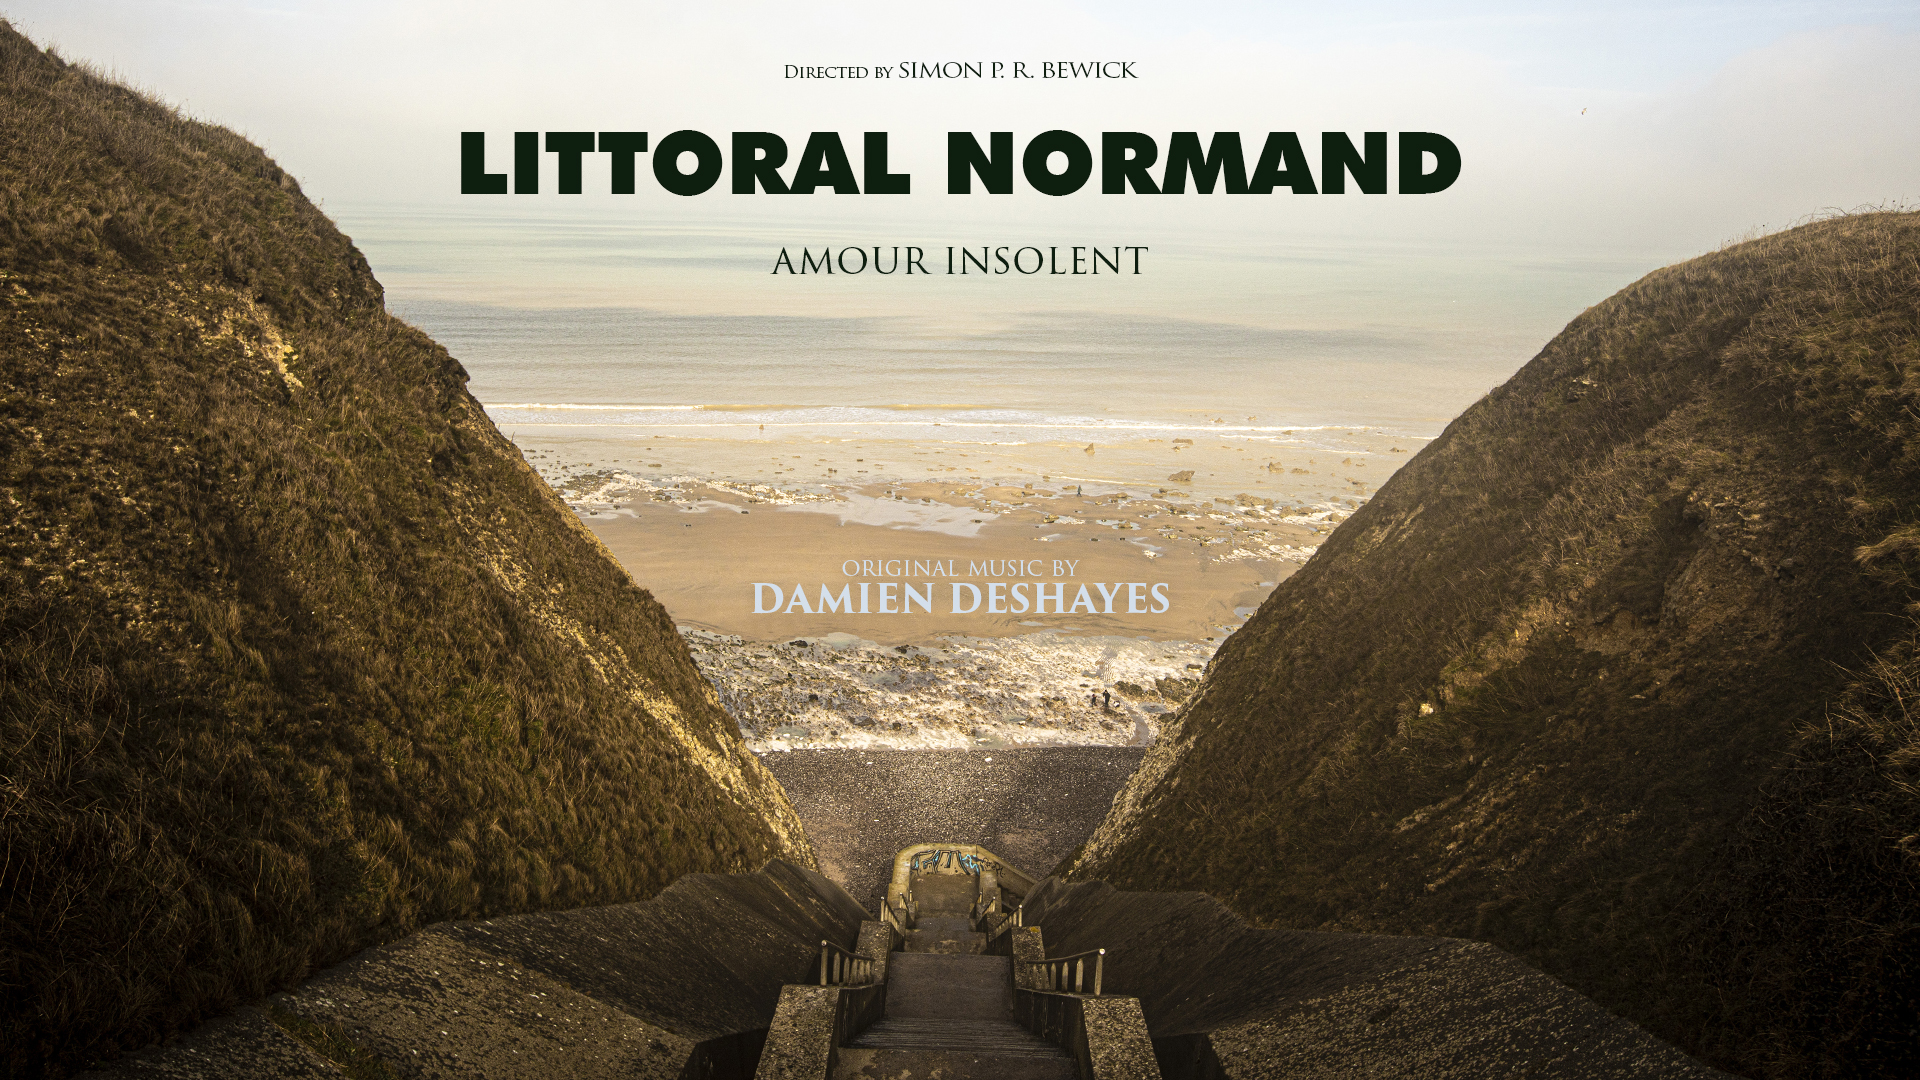 Music from the film &#8220;Littoral Normand, Amour Insolent&#8221;